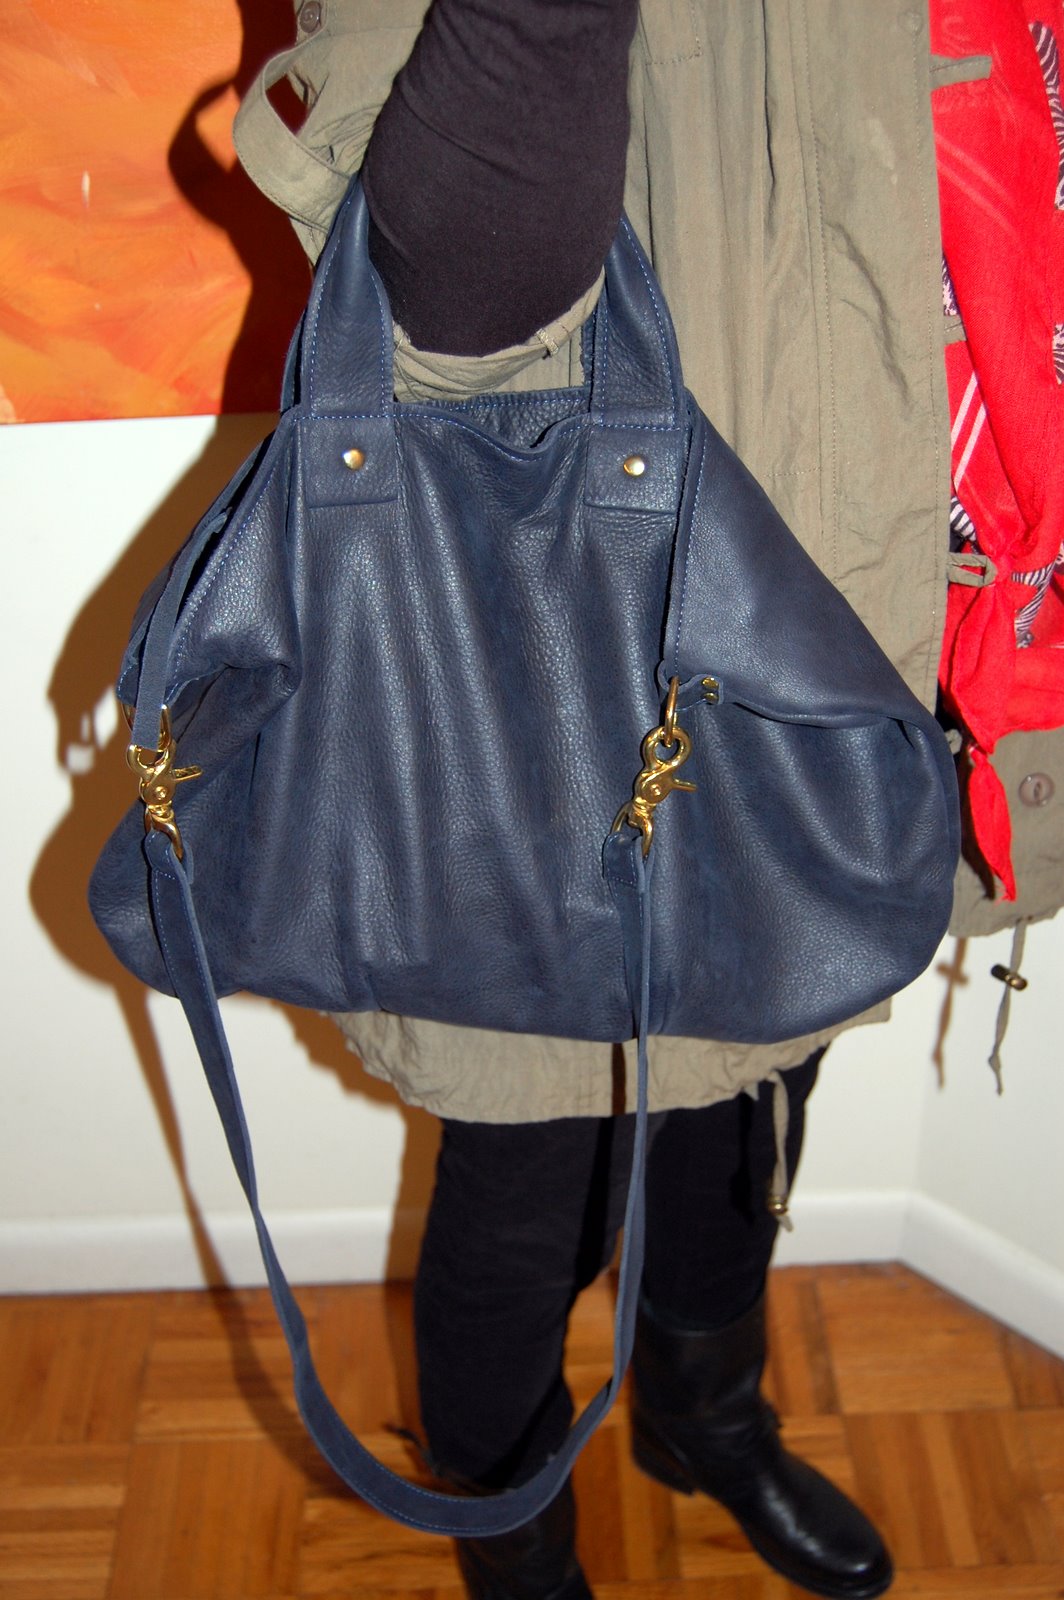 260 To carry ideas  bags, leather, clare vivier